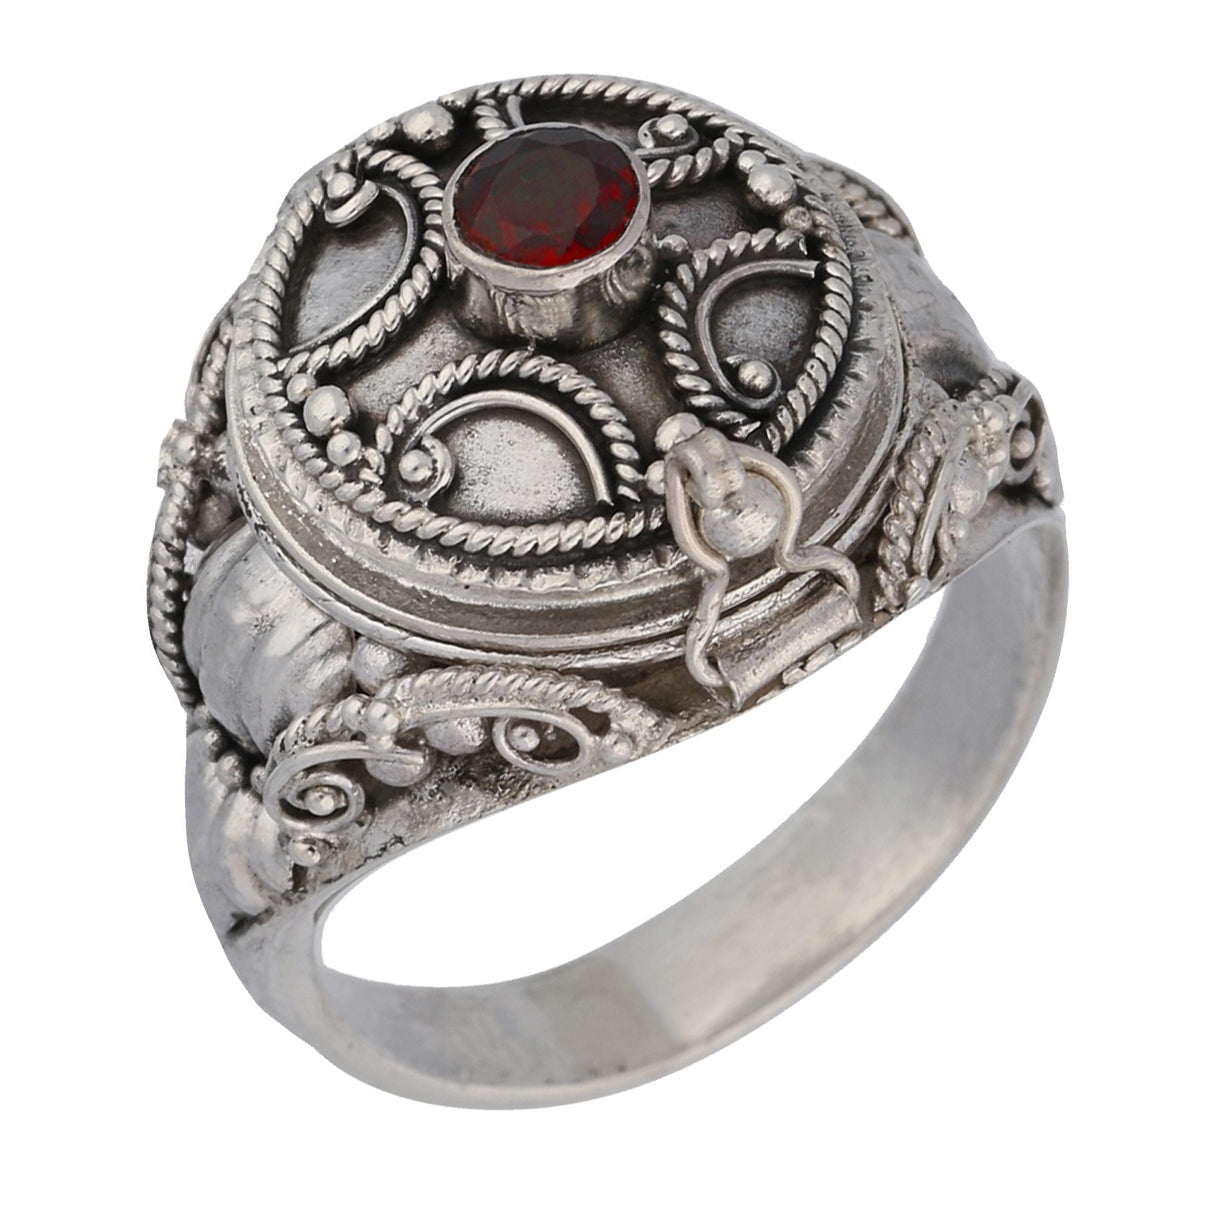 Medieval Ringed Cross Poison Locket Sterling Silver and Garnet Ring ...